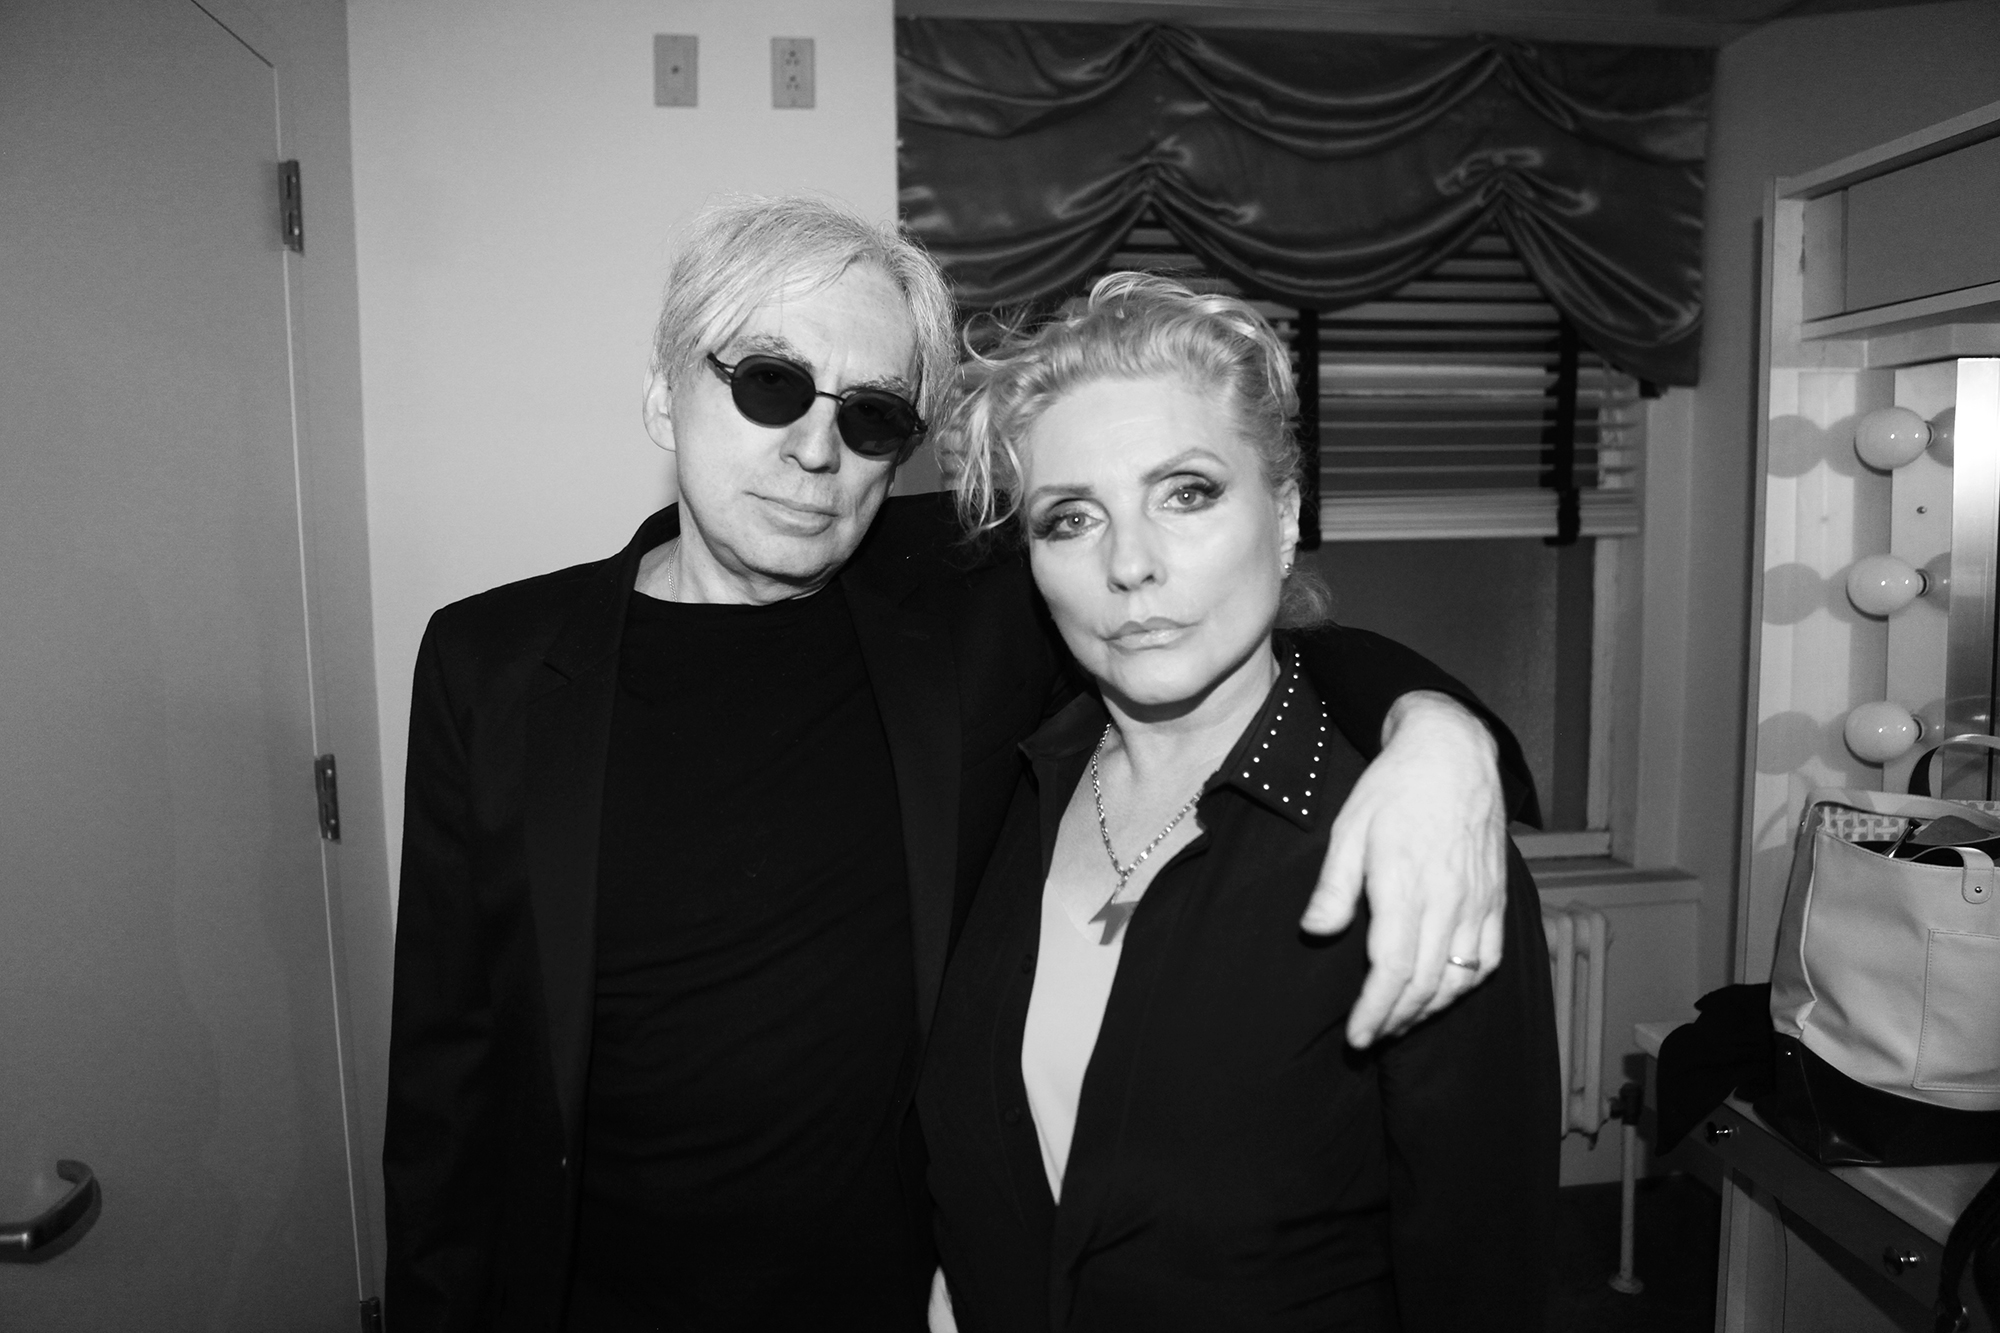 Blondie's Chris Stein and Debbie Harry:
                              
                                [His diversity] was an inspiration.  - Harry